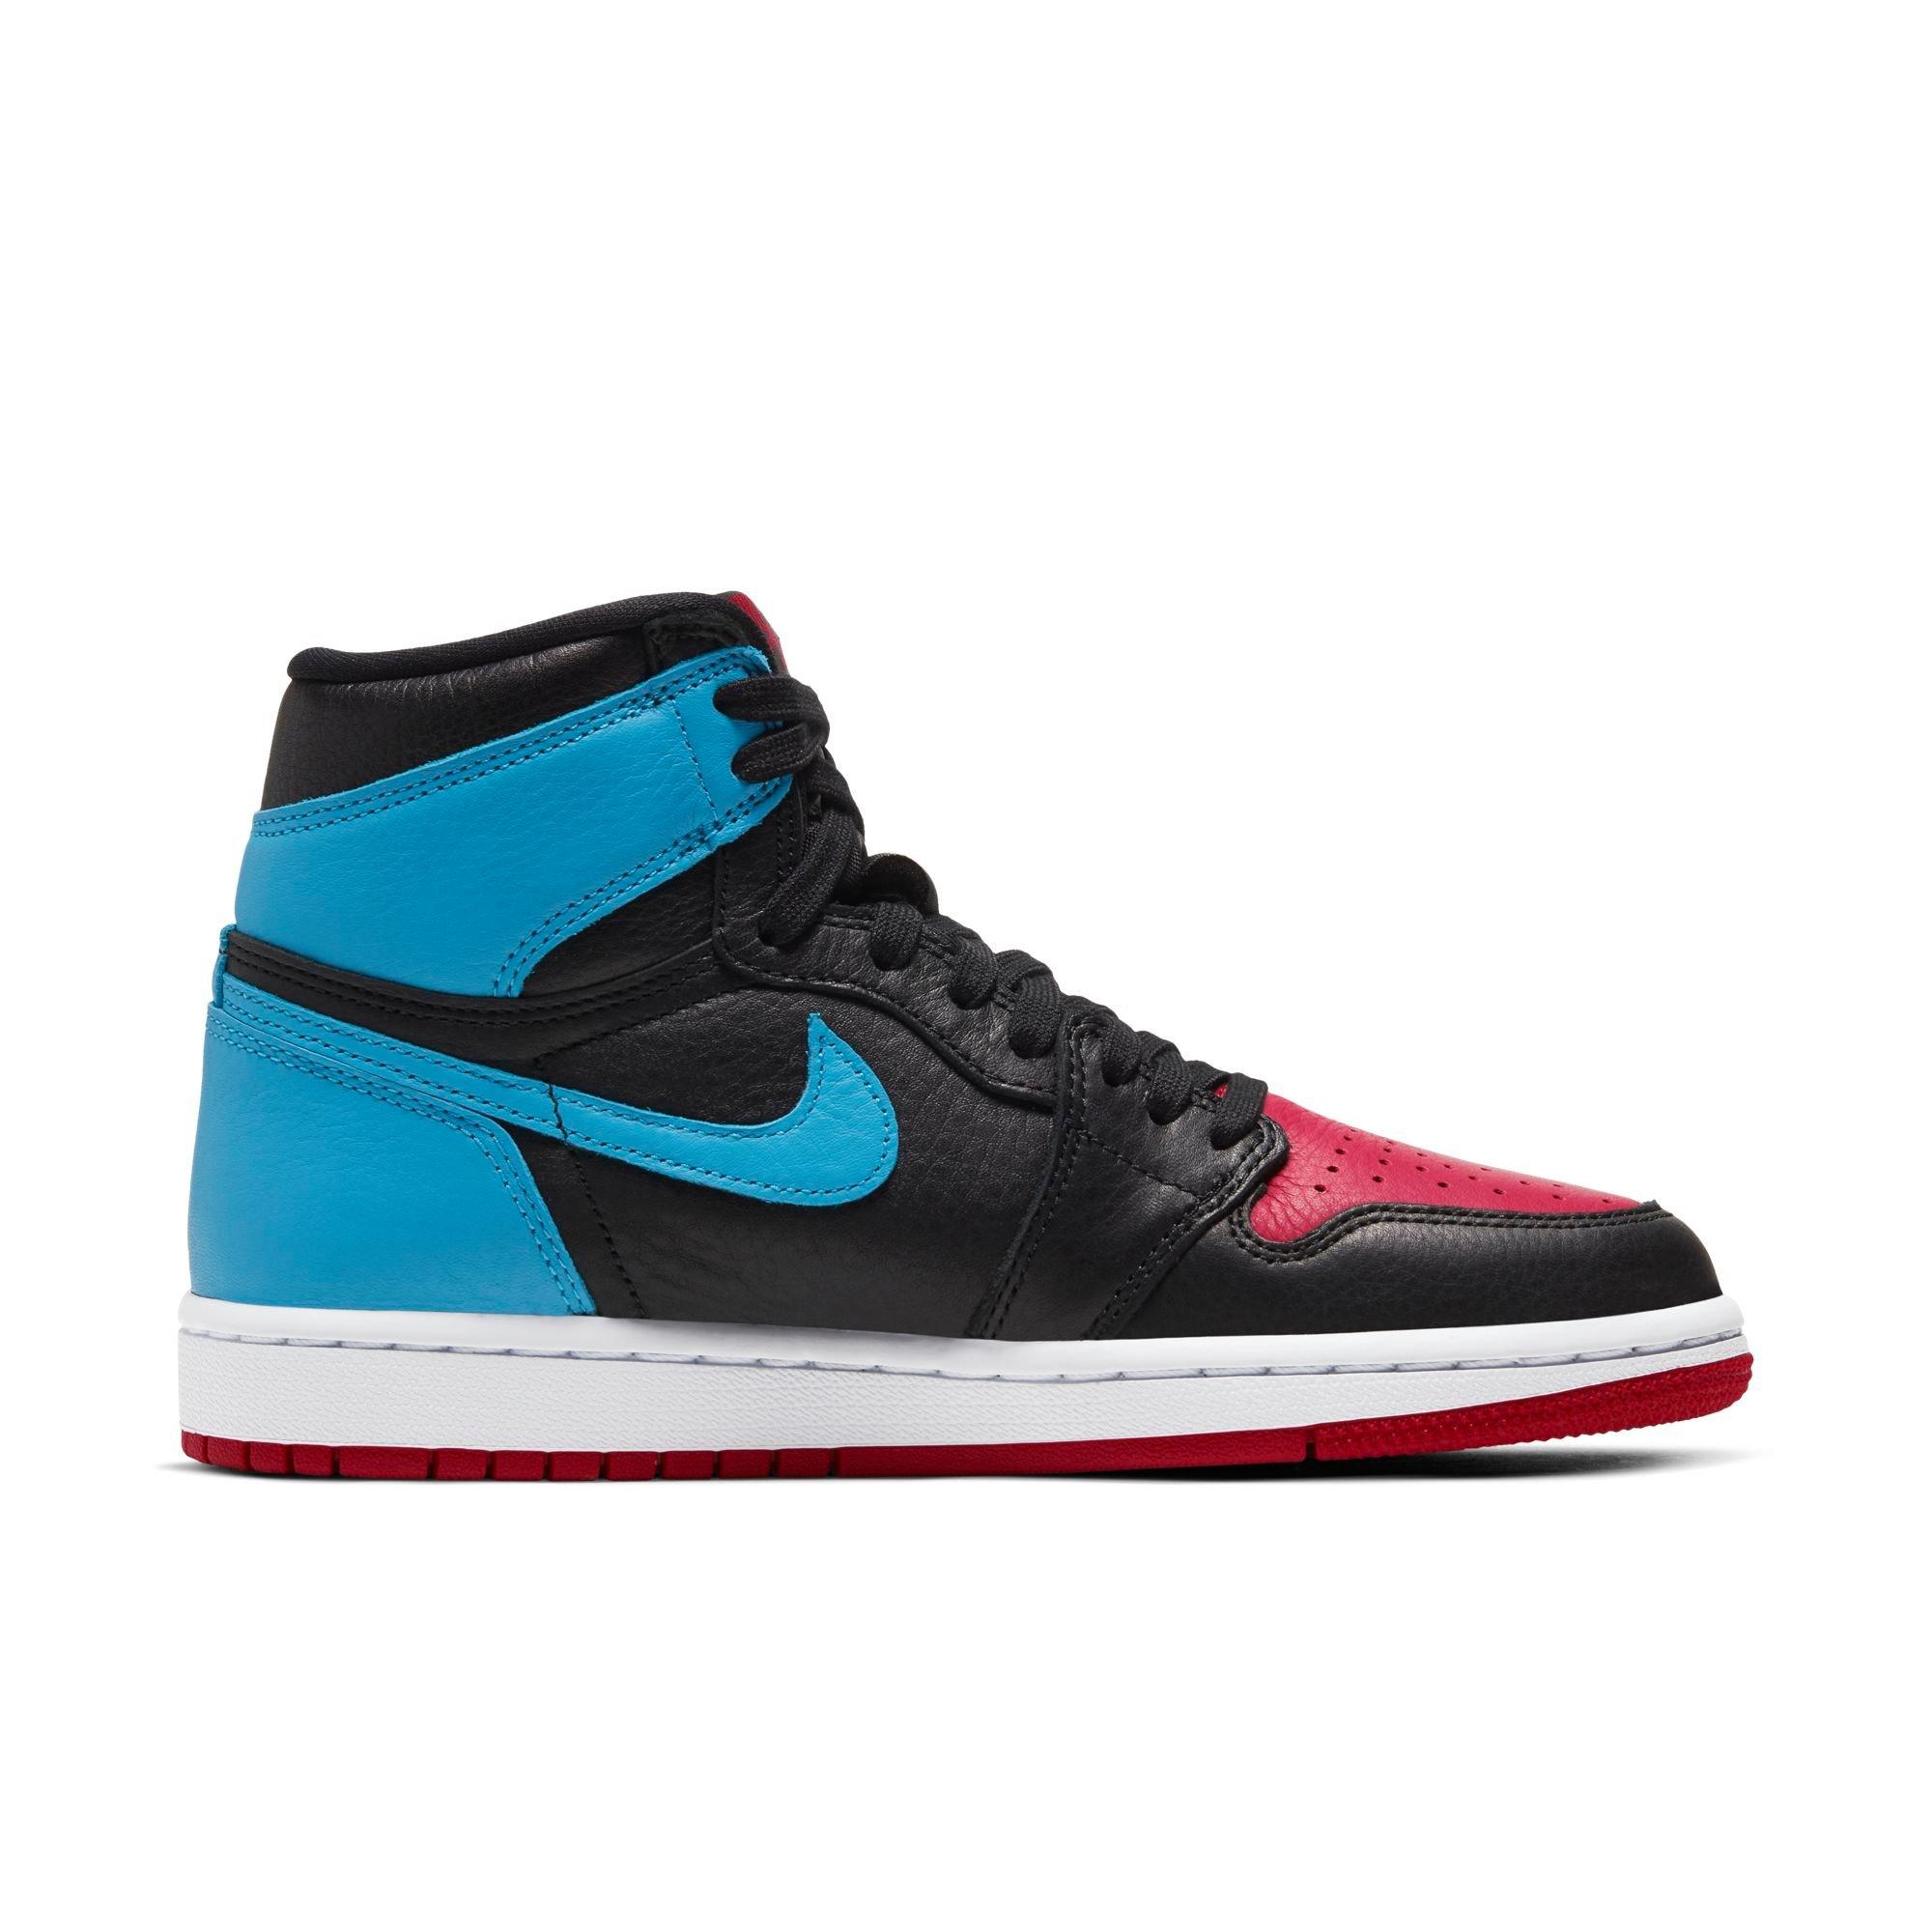 red black and blue ones